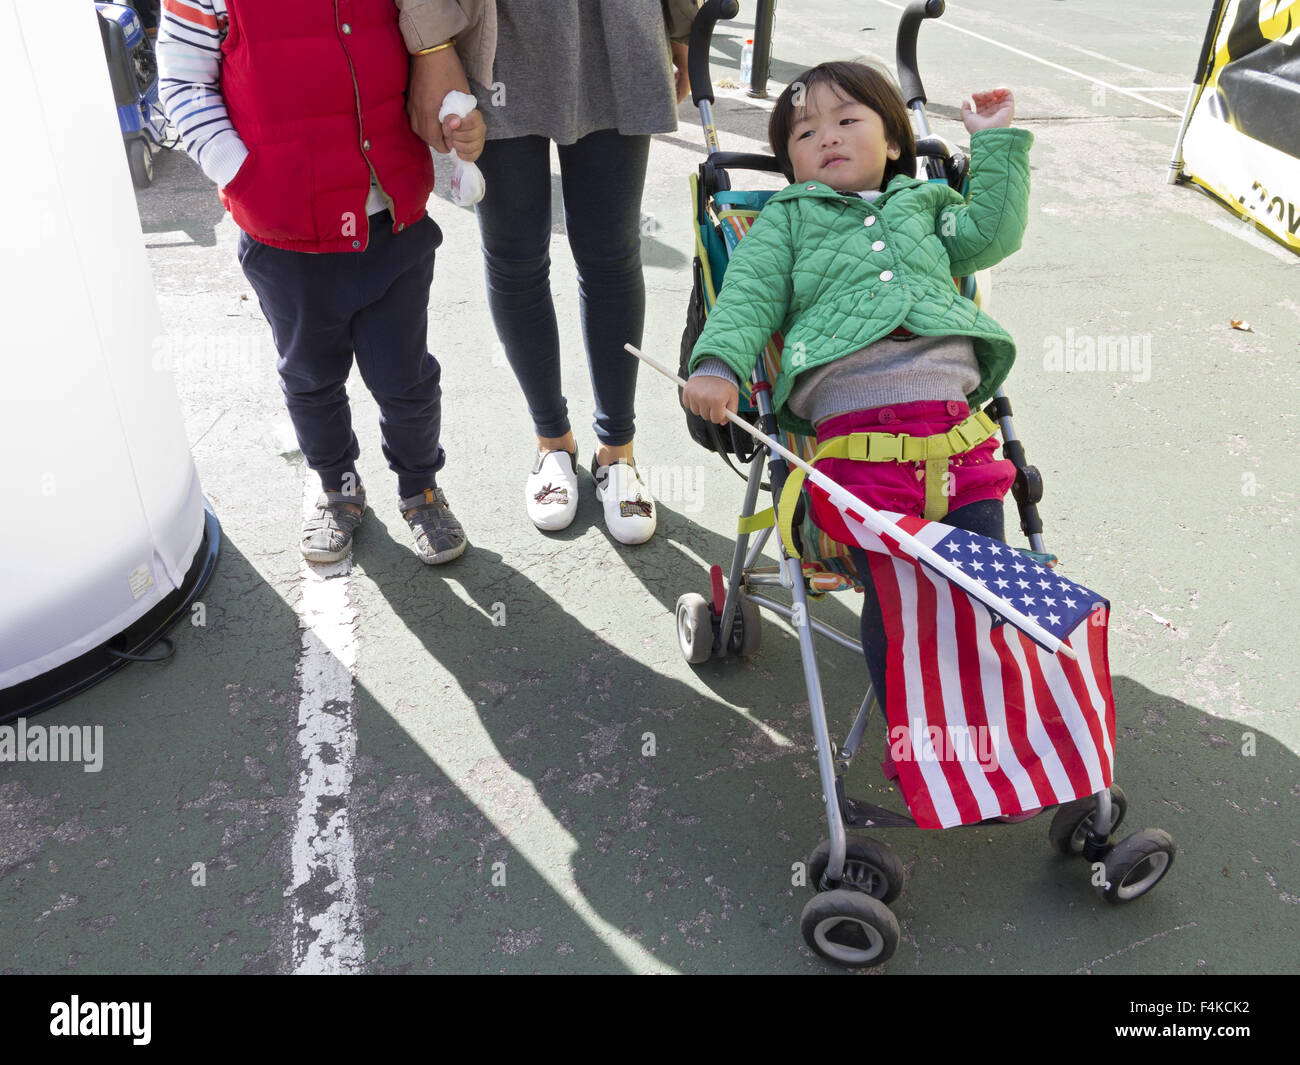 China-Tage-Festival und Laternenumzug in Chinatown in Sunset Park in Brooklyn, NY, Oct.18, 2015. Stockfoto